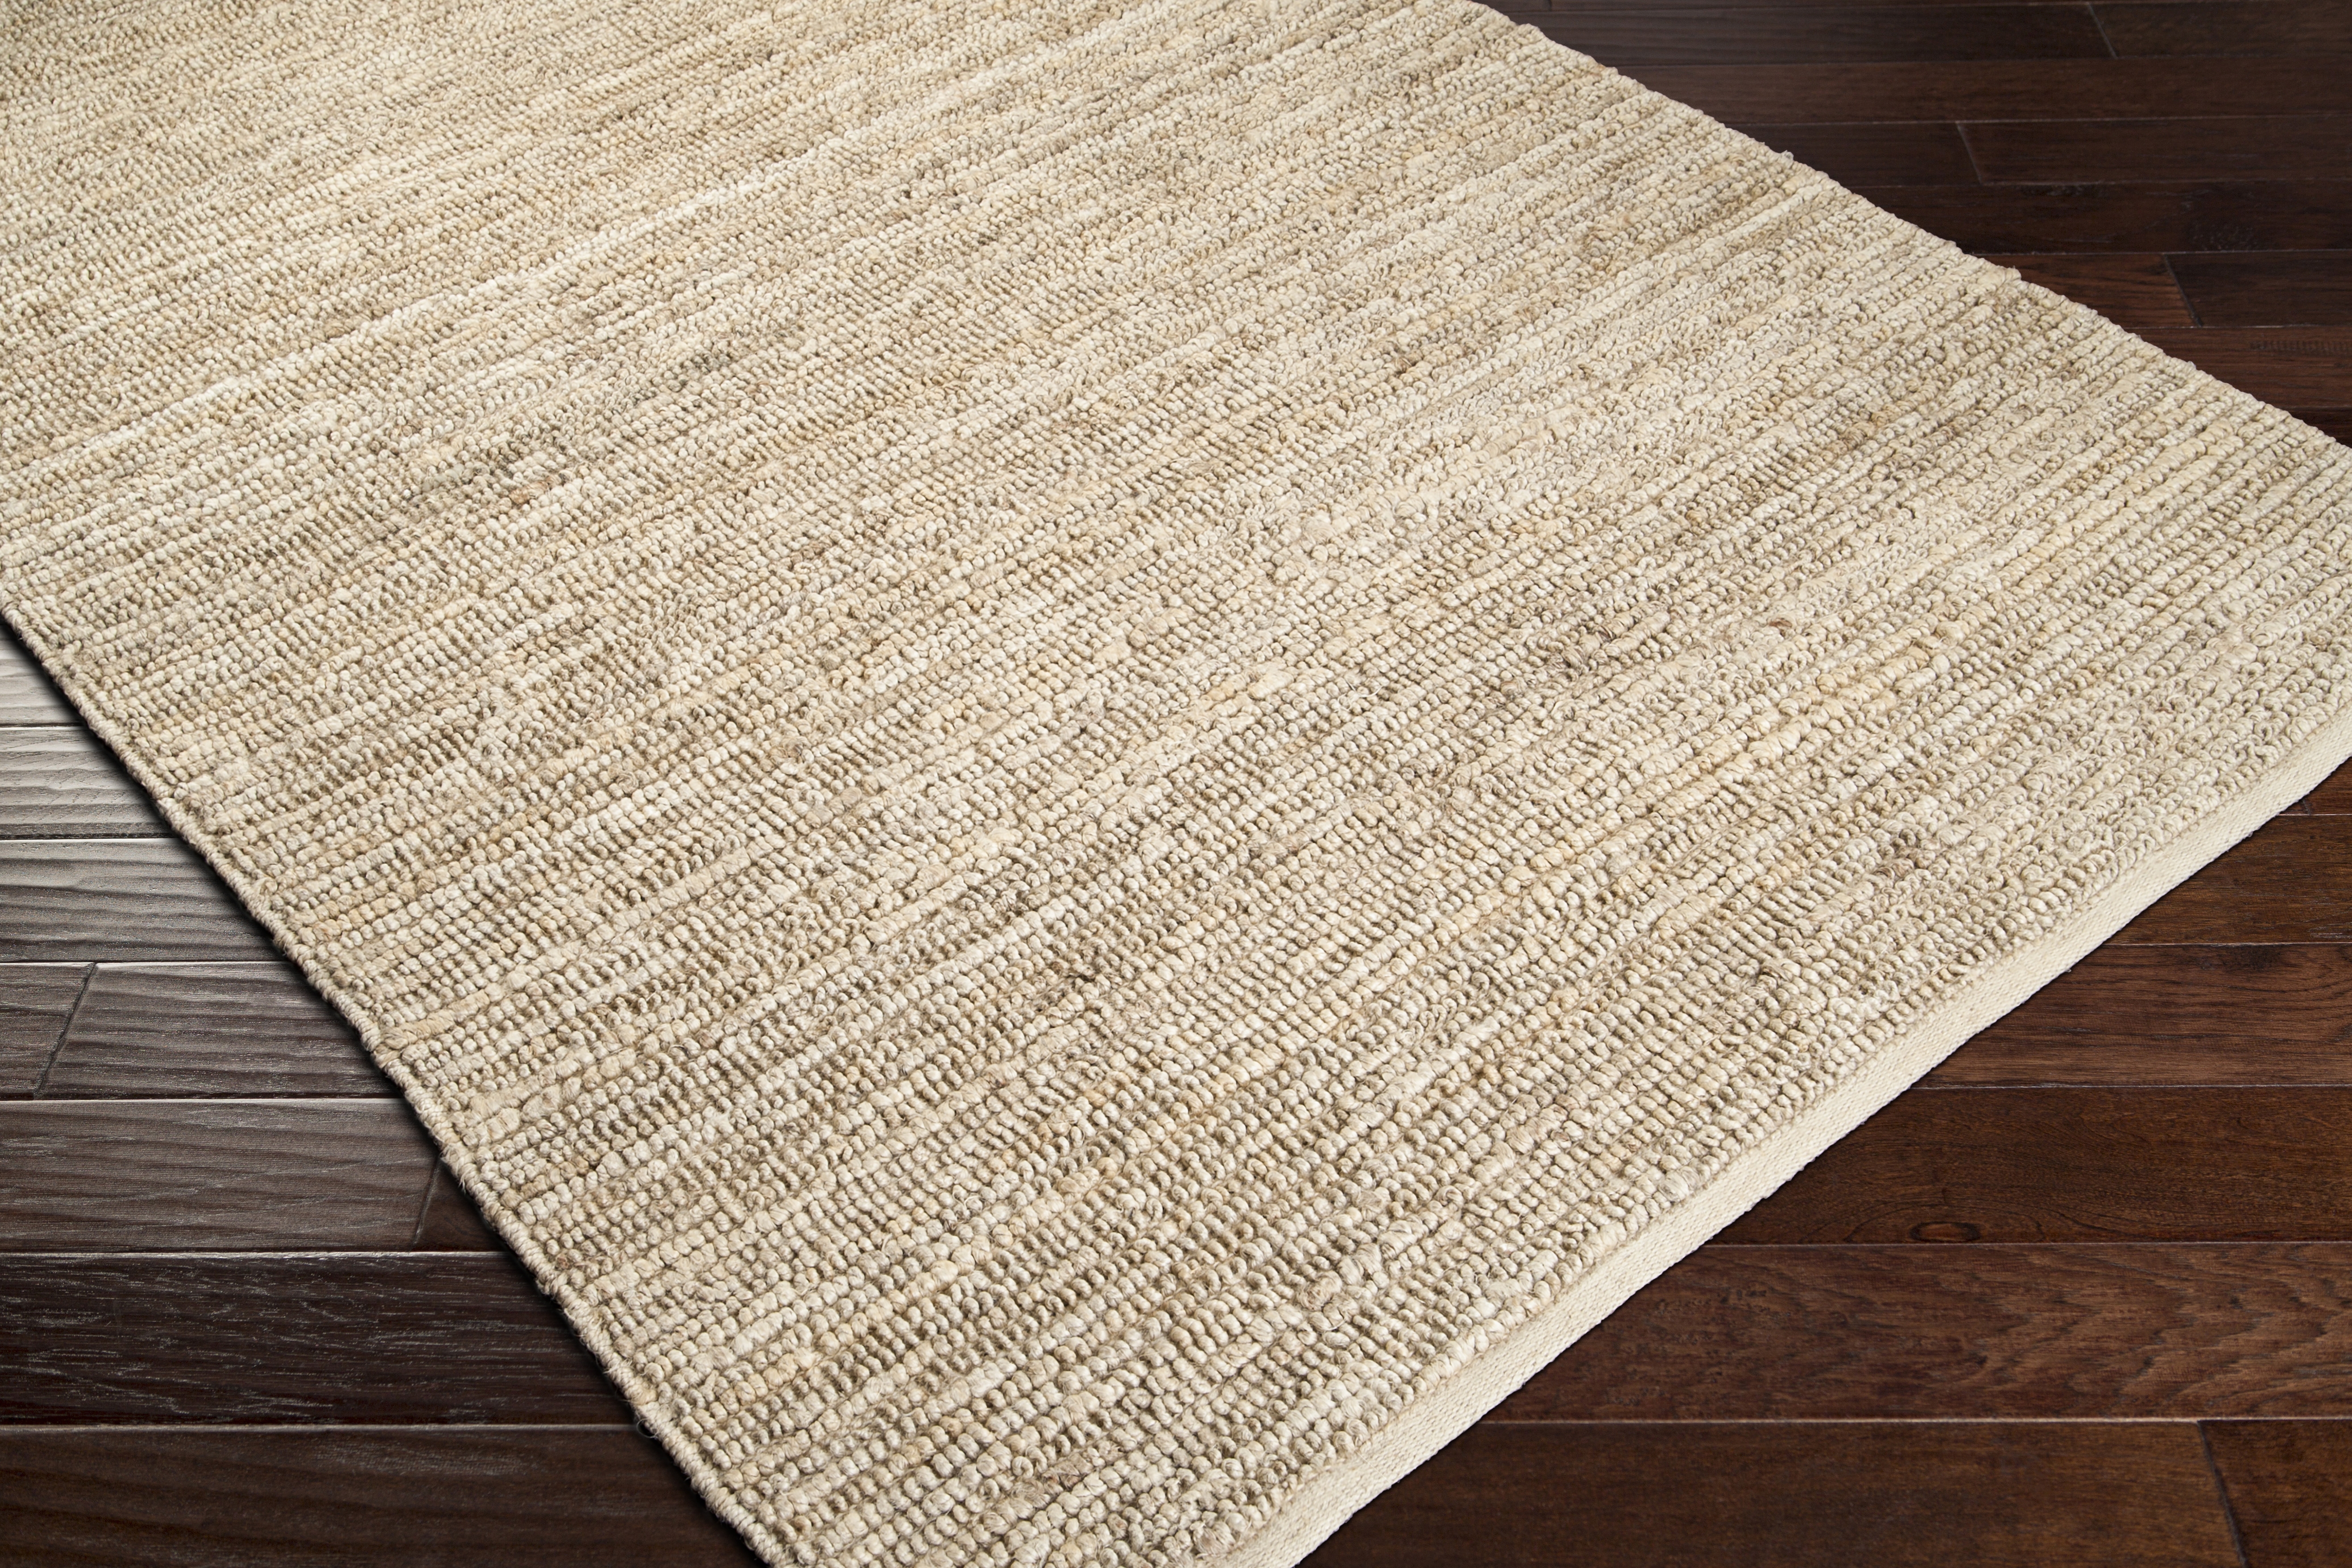 Continental Rug, 8' x 11' - Image 6